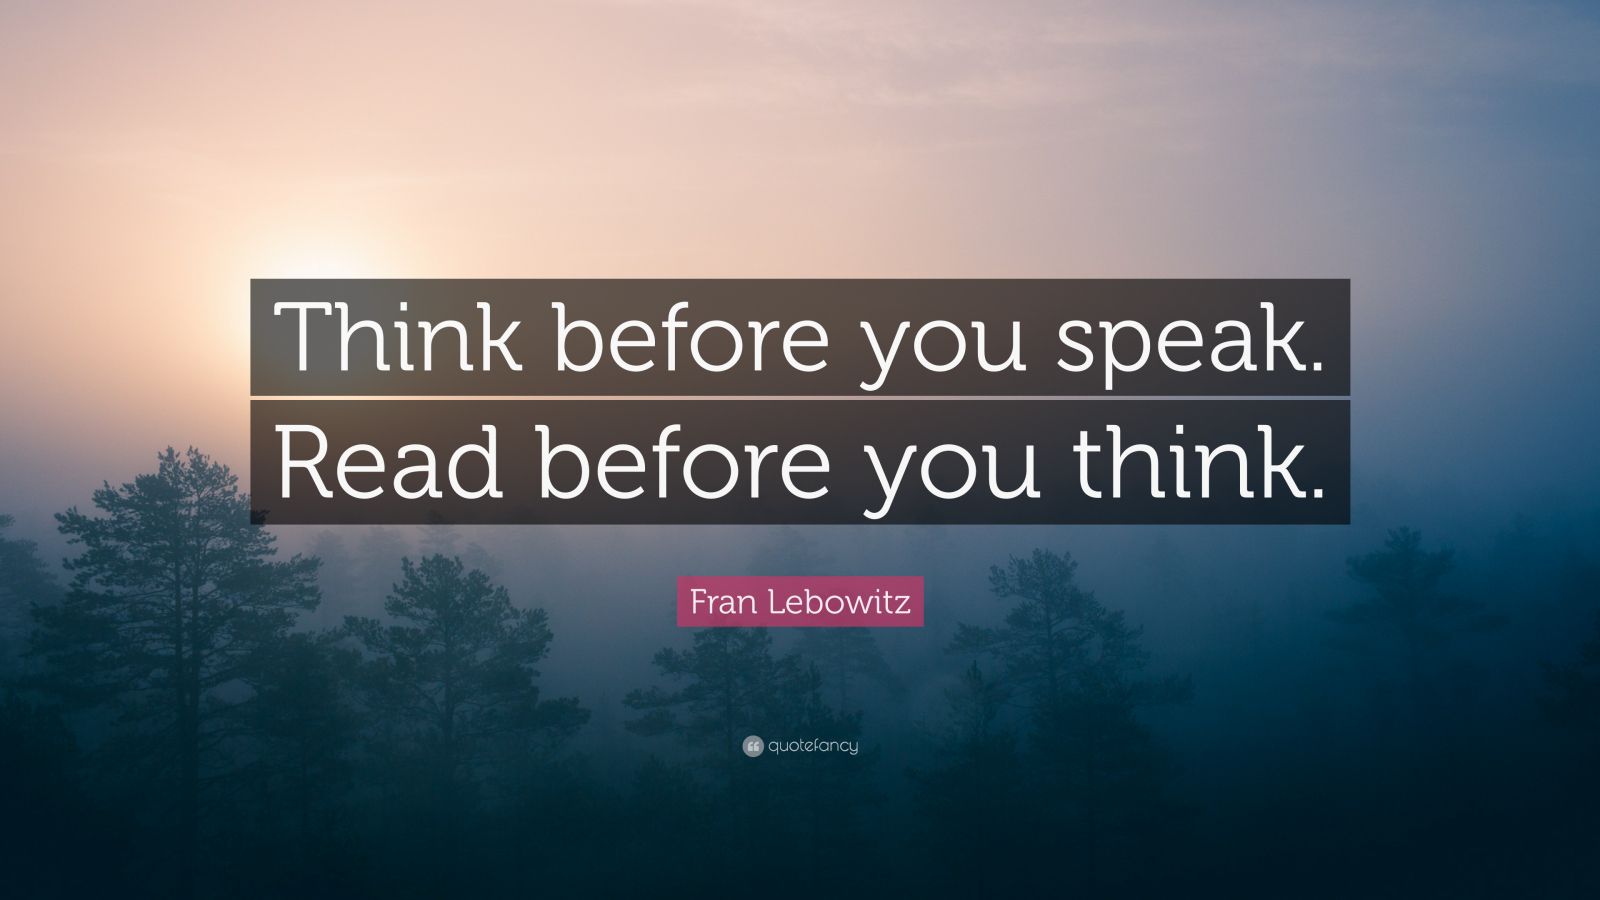 Fran Lebowitz Quote “Think before you speak. Read before